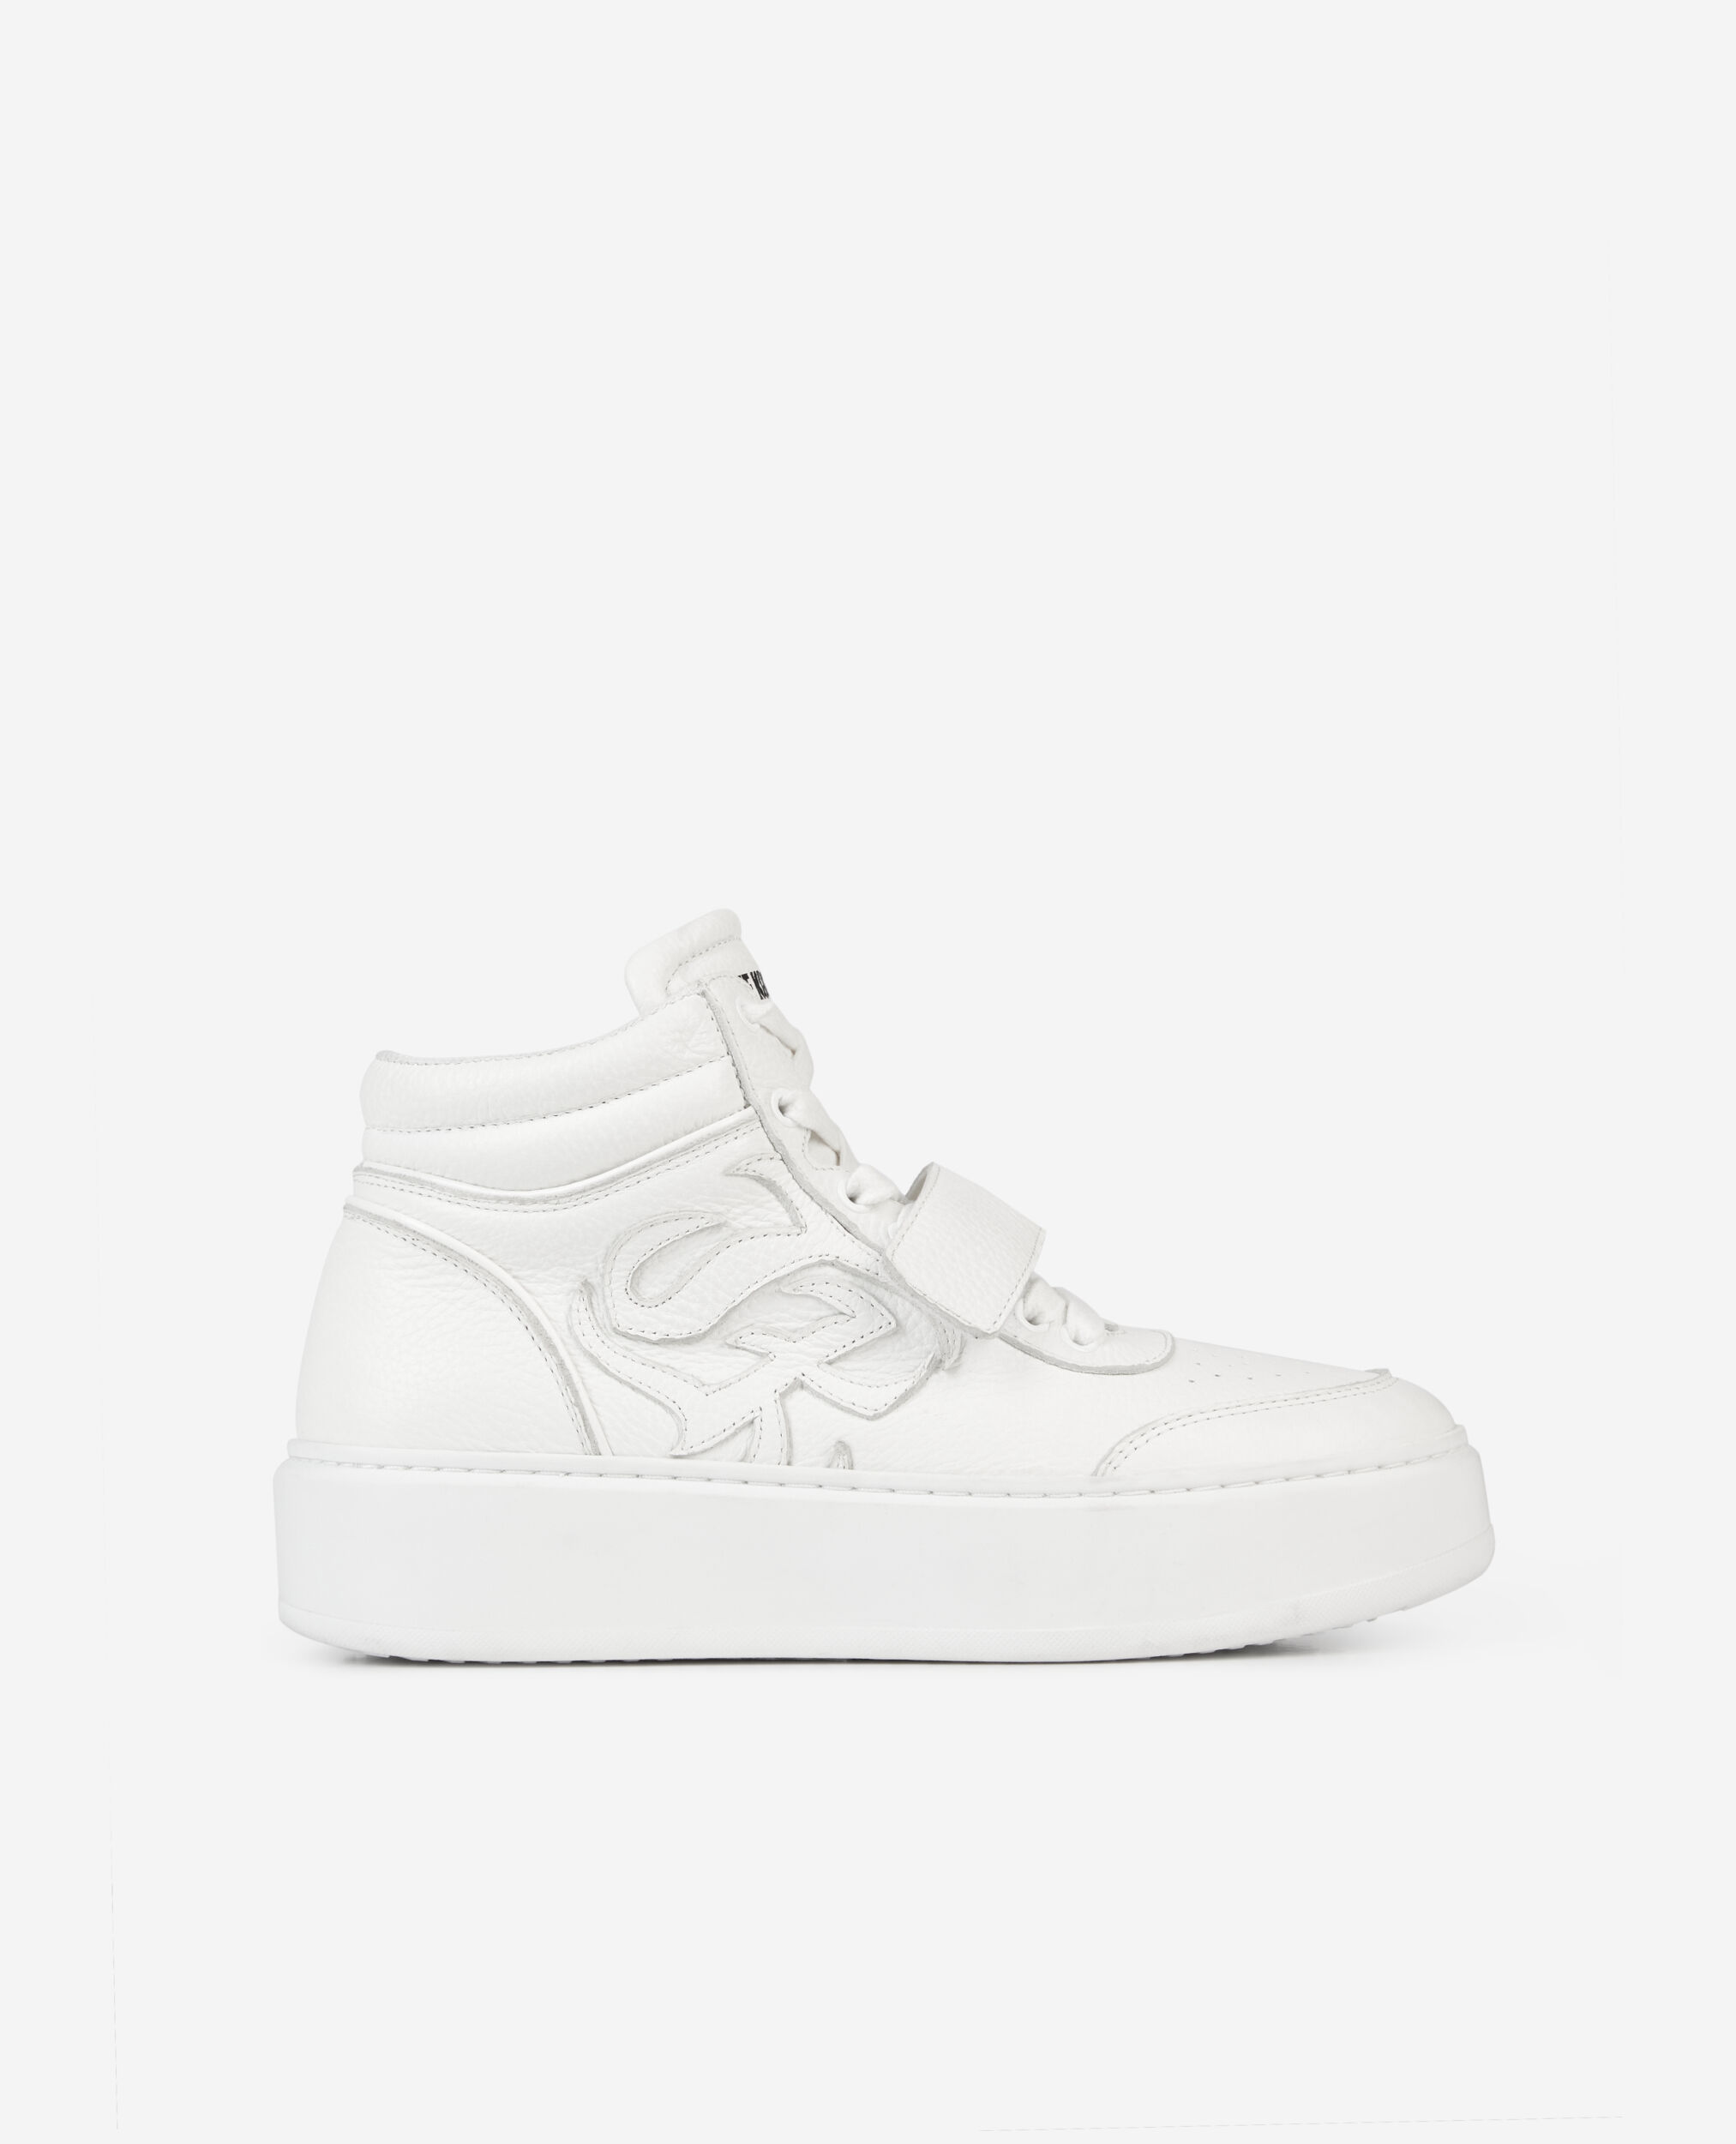 White leather high top sneakers, WHITE, hi-res image number null